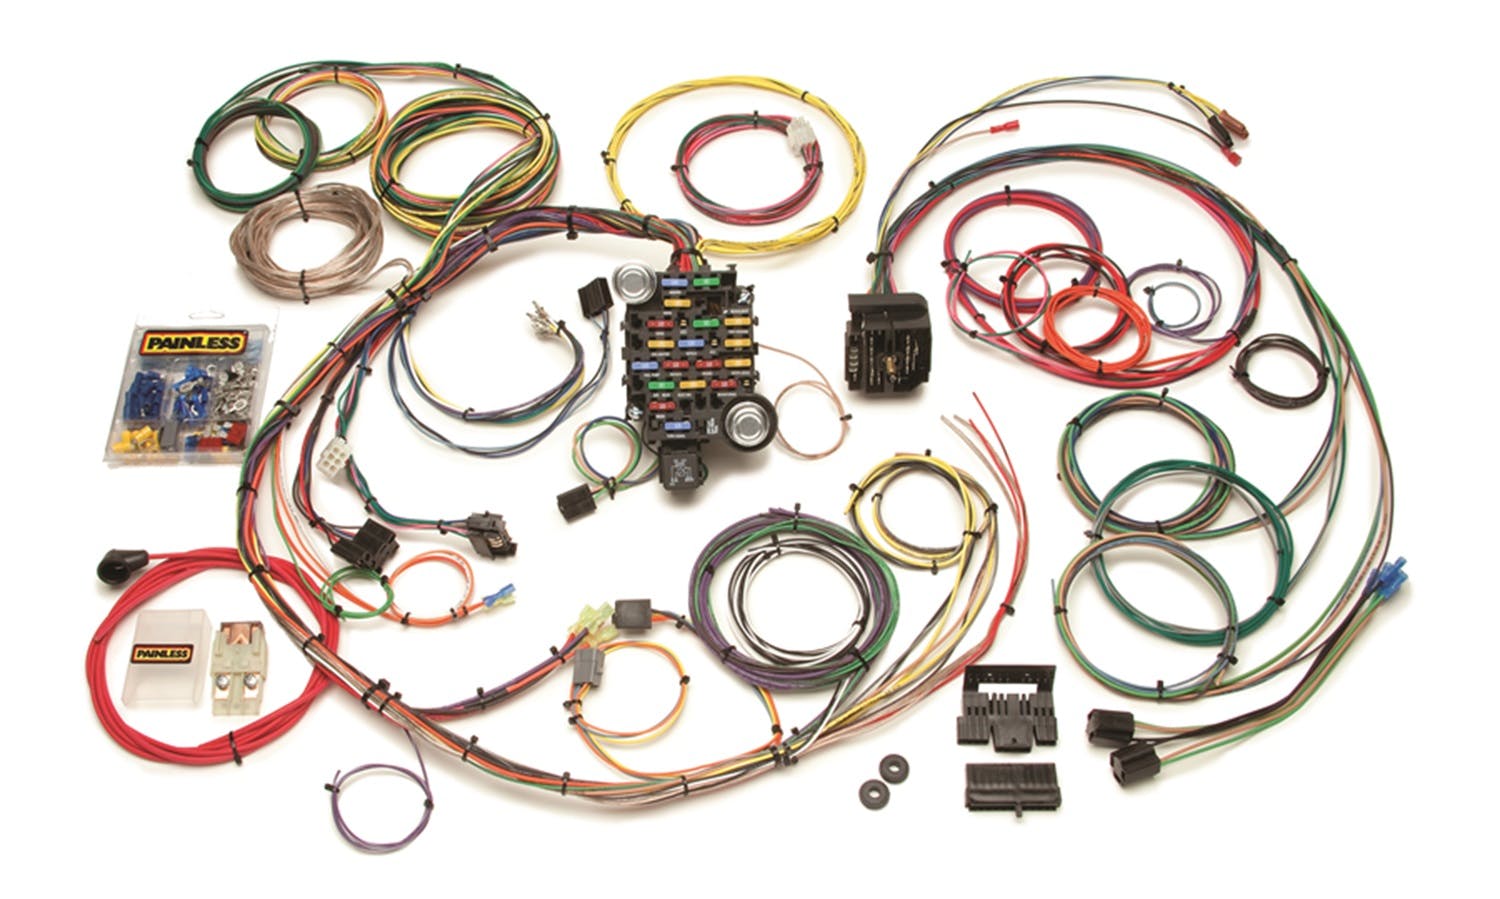 Painless 20101 25 Circuit Wiring Harness